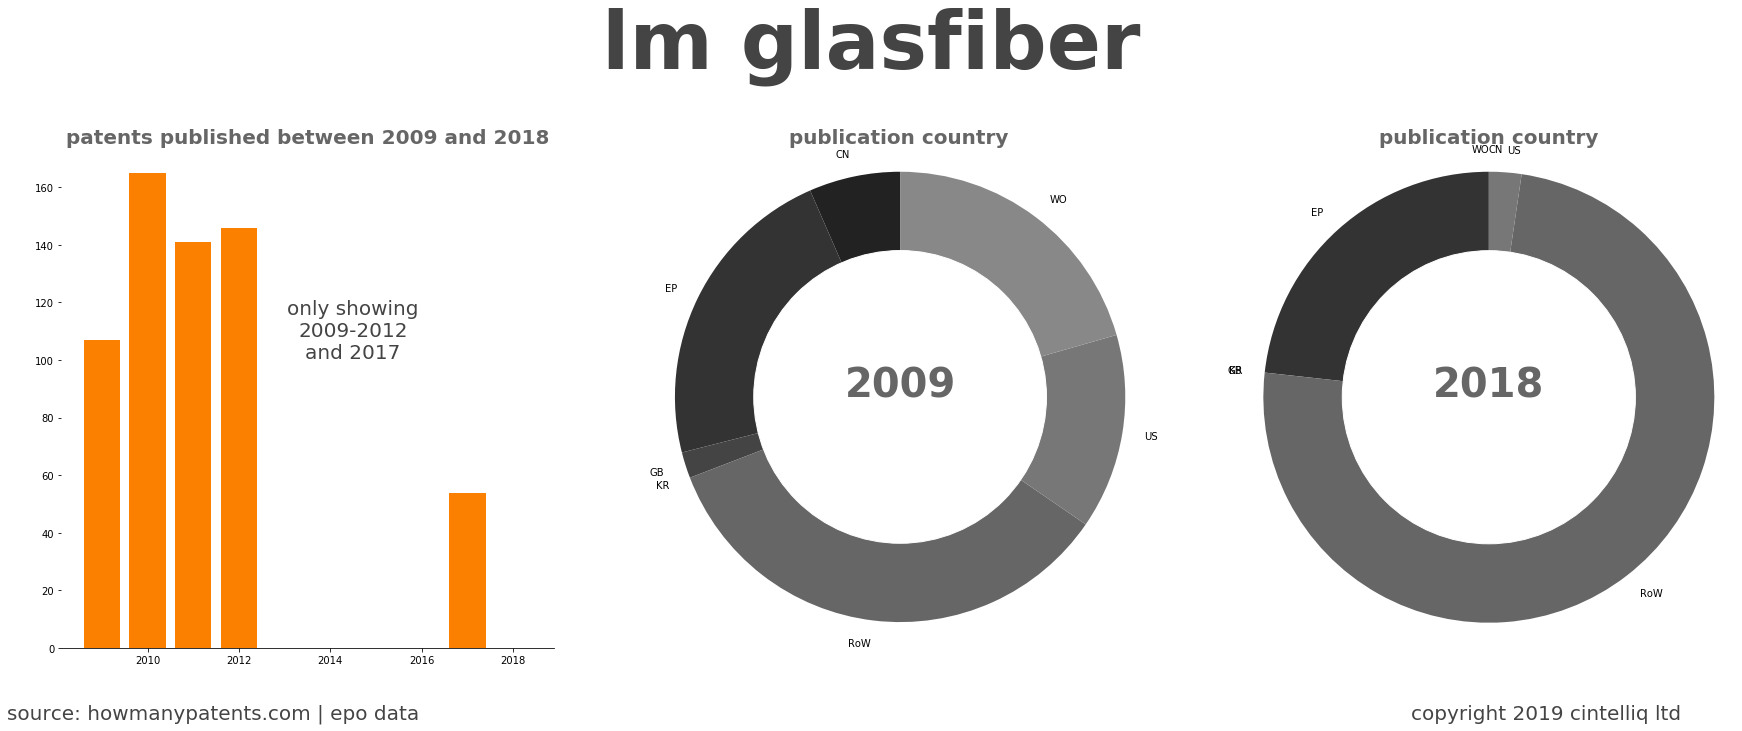 summary of patents for Lm Glasfiber